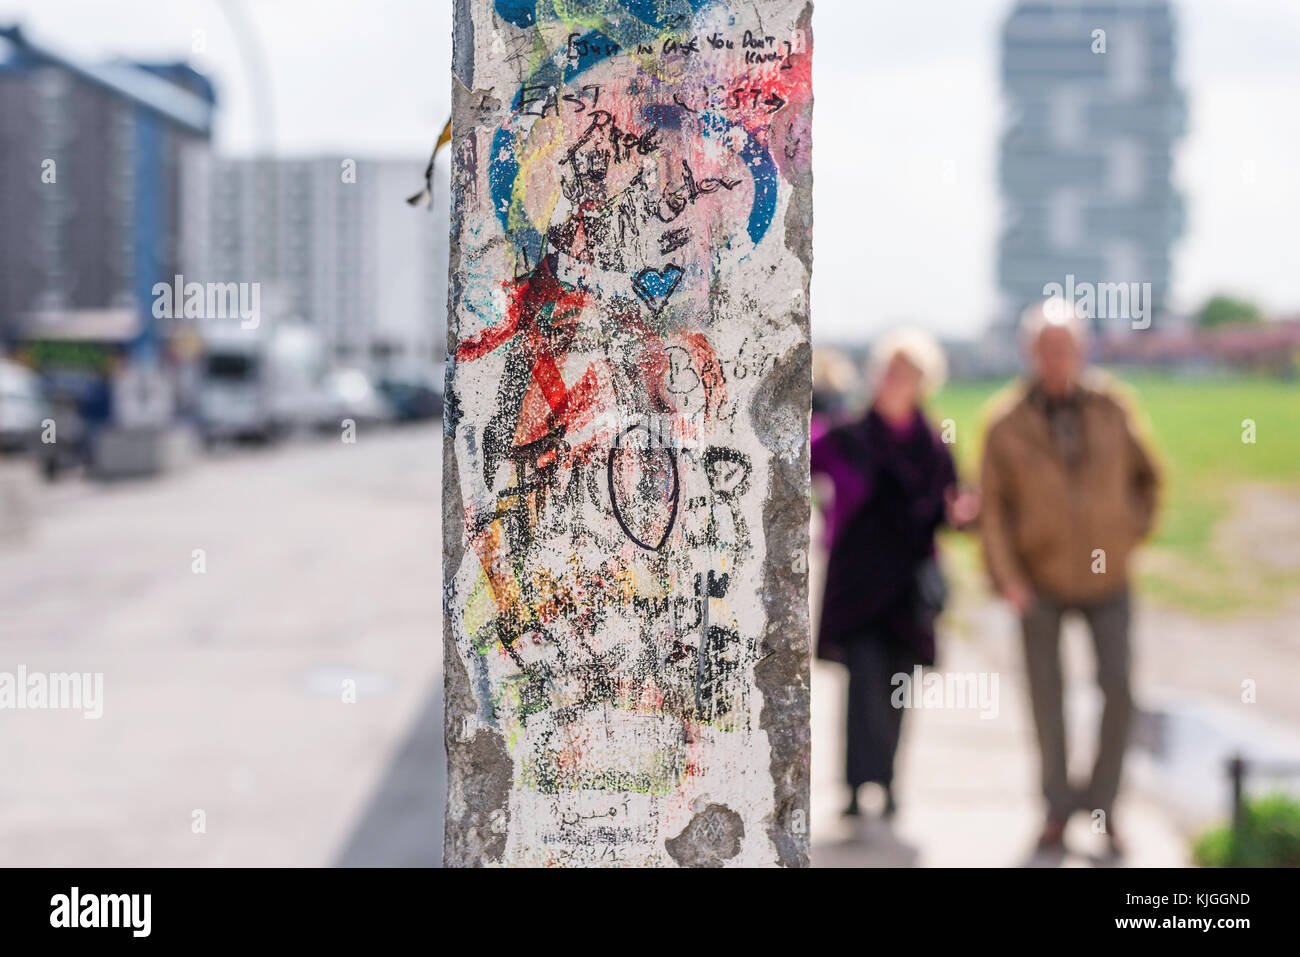 Berlin wall, graffitied end-piece of a section of the Berlin Wall that divided the city between east and west in the post-war communist era, Germany. Stock Photo